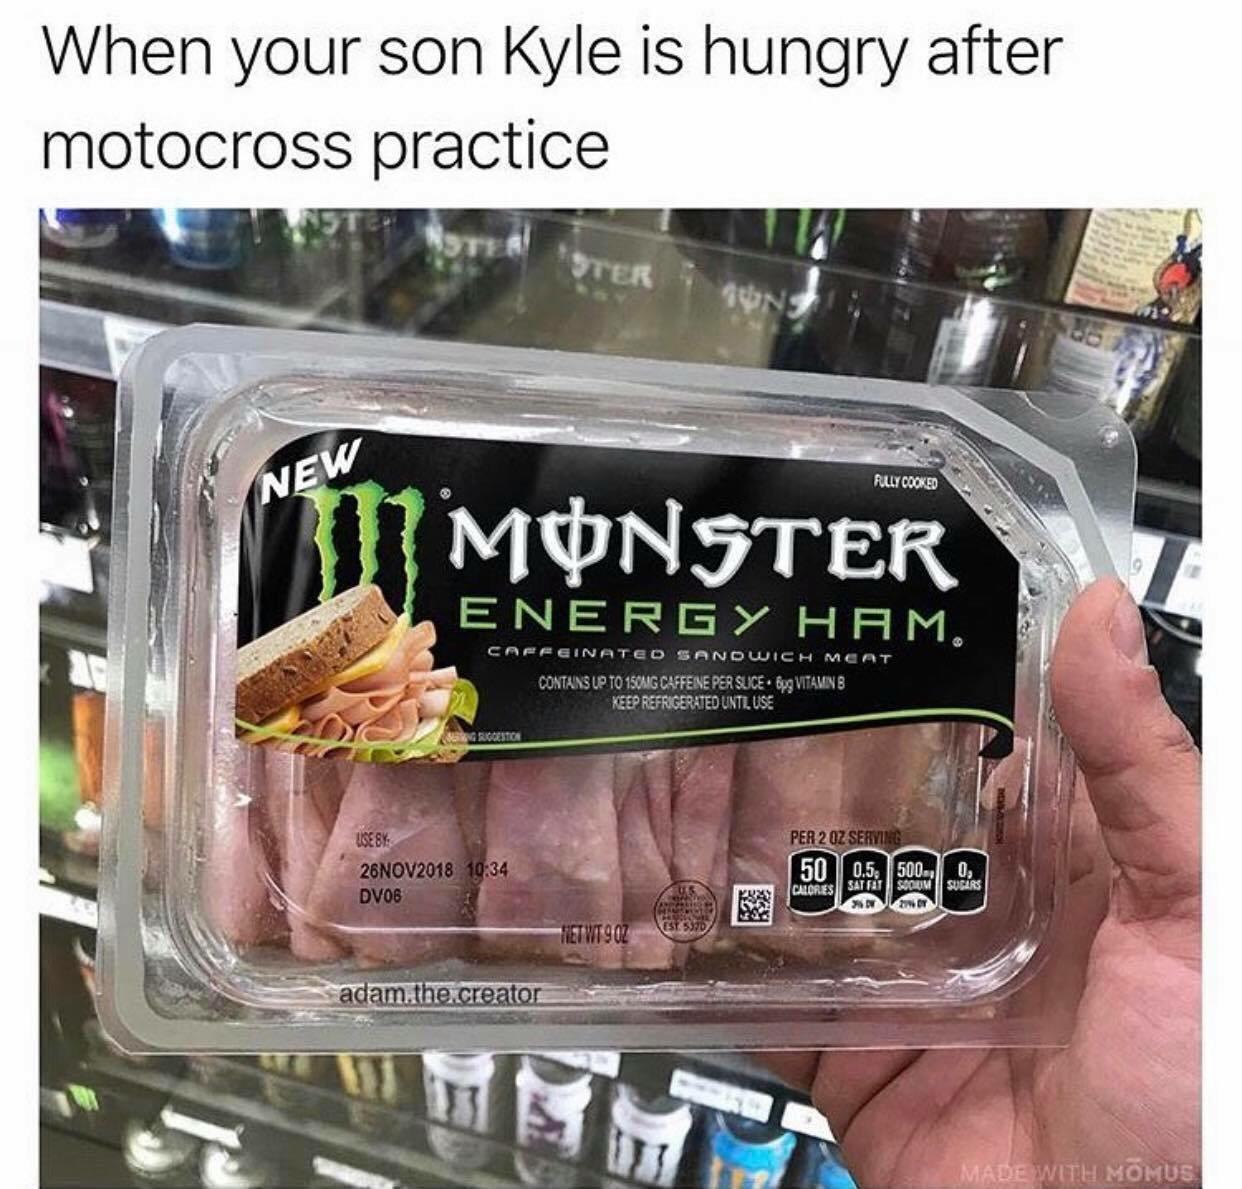 Kyle Meme Monster energy ham - When your son Kyle is hungry after motocross practice Rully Cooked New Monster Energy Ham. Caffeinated Sandwich Meat Contains Up To 150MG Caffeine Per Suice 6pg Vitaminb Keep Refrigerated Until Use Per 2 Oz Serying